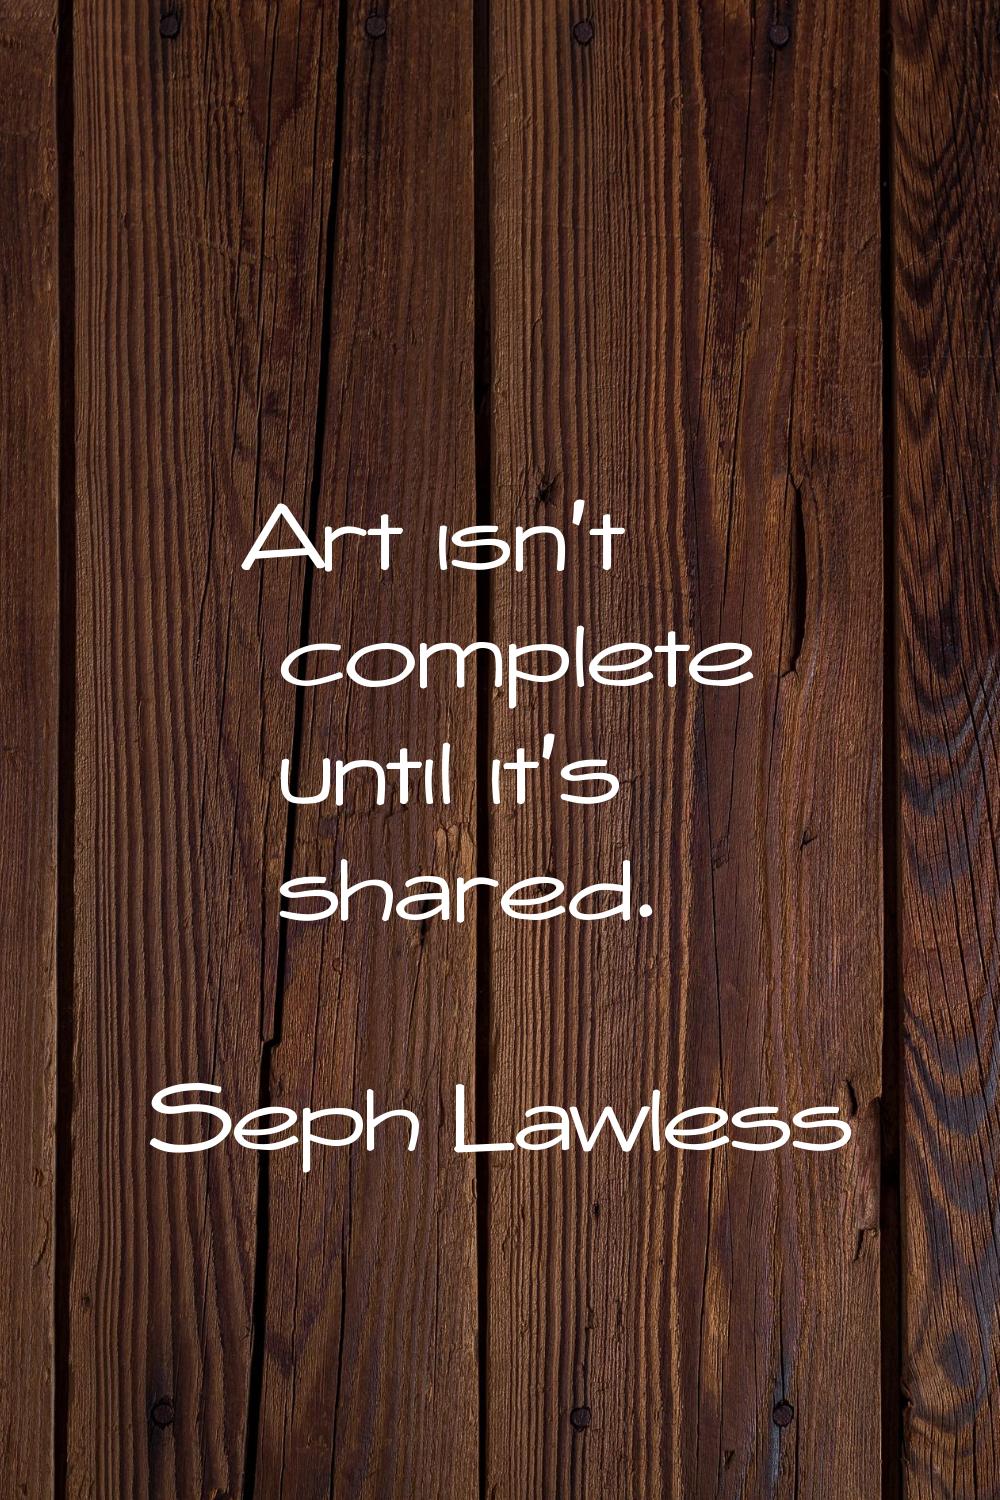 Art isn't complete until it's shared.